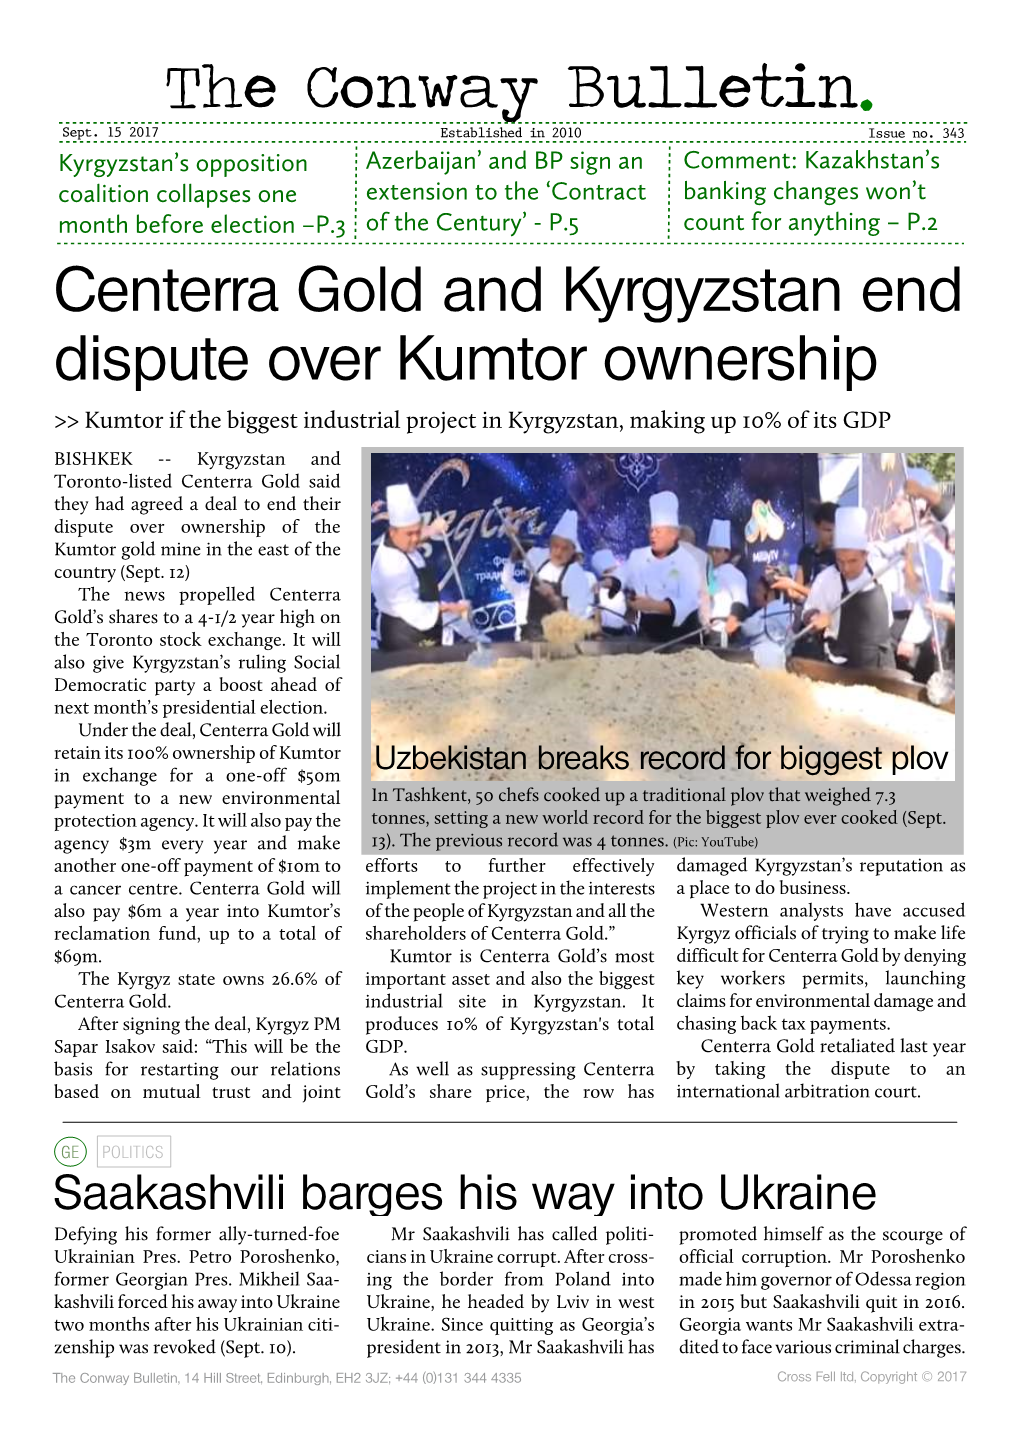 Centerra Gold and Kyrgyzstan End Dispute Over Kumtor Ownership The